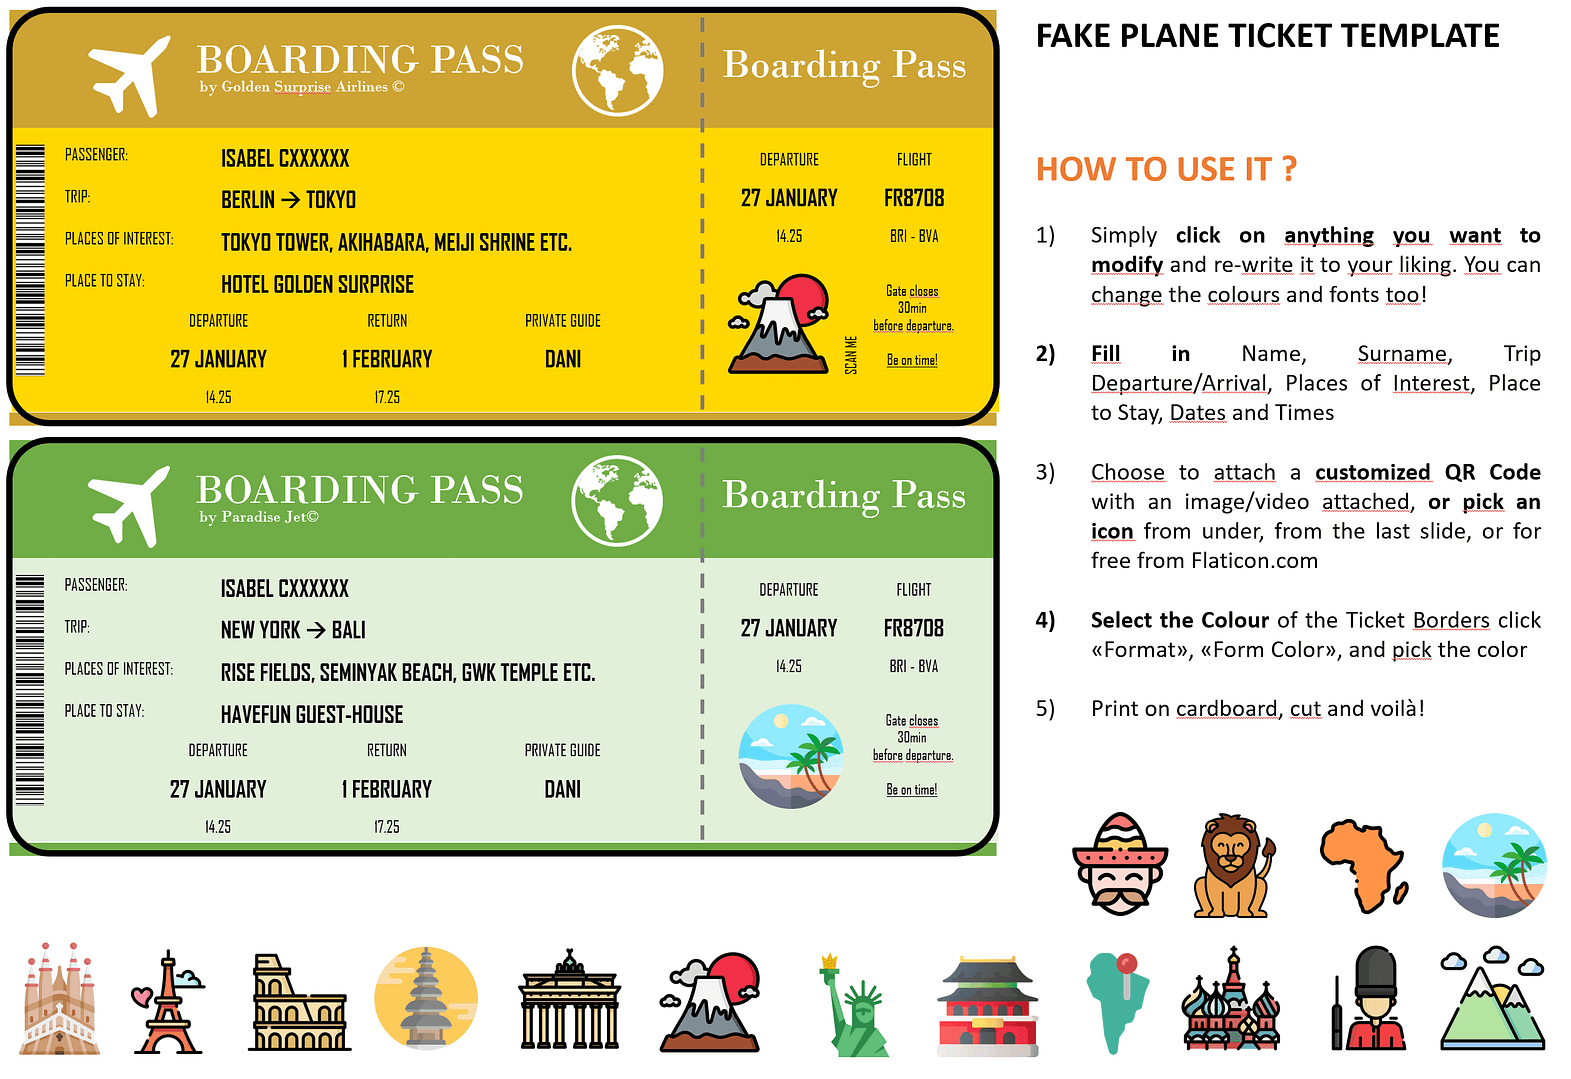 fake airline plane ticket template - instructions how to customize